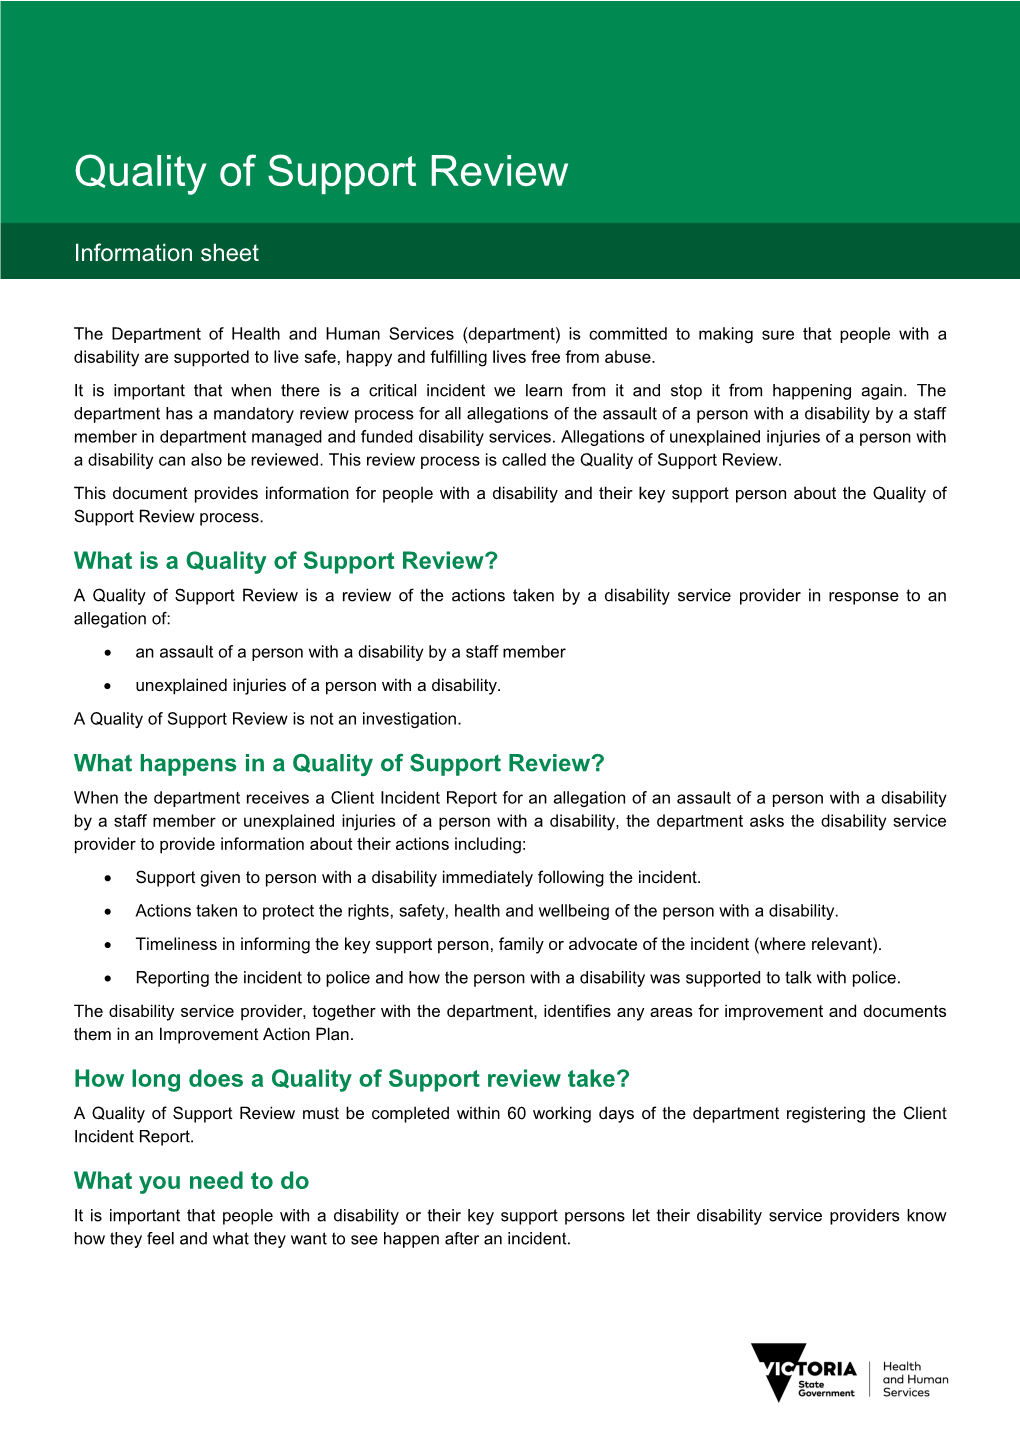 Quality of Support Review Information Sheet